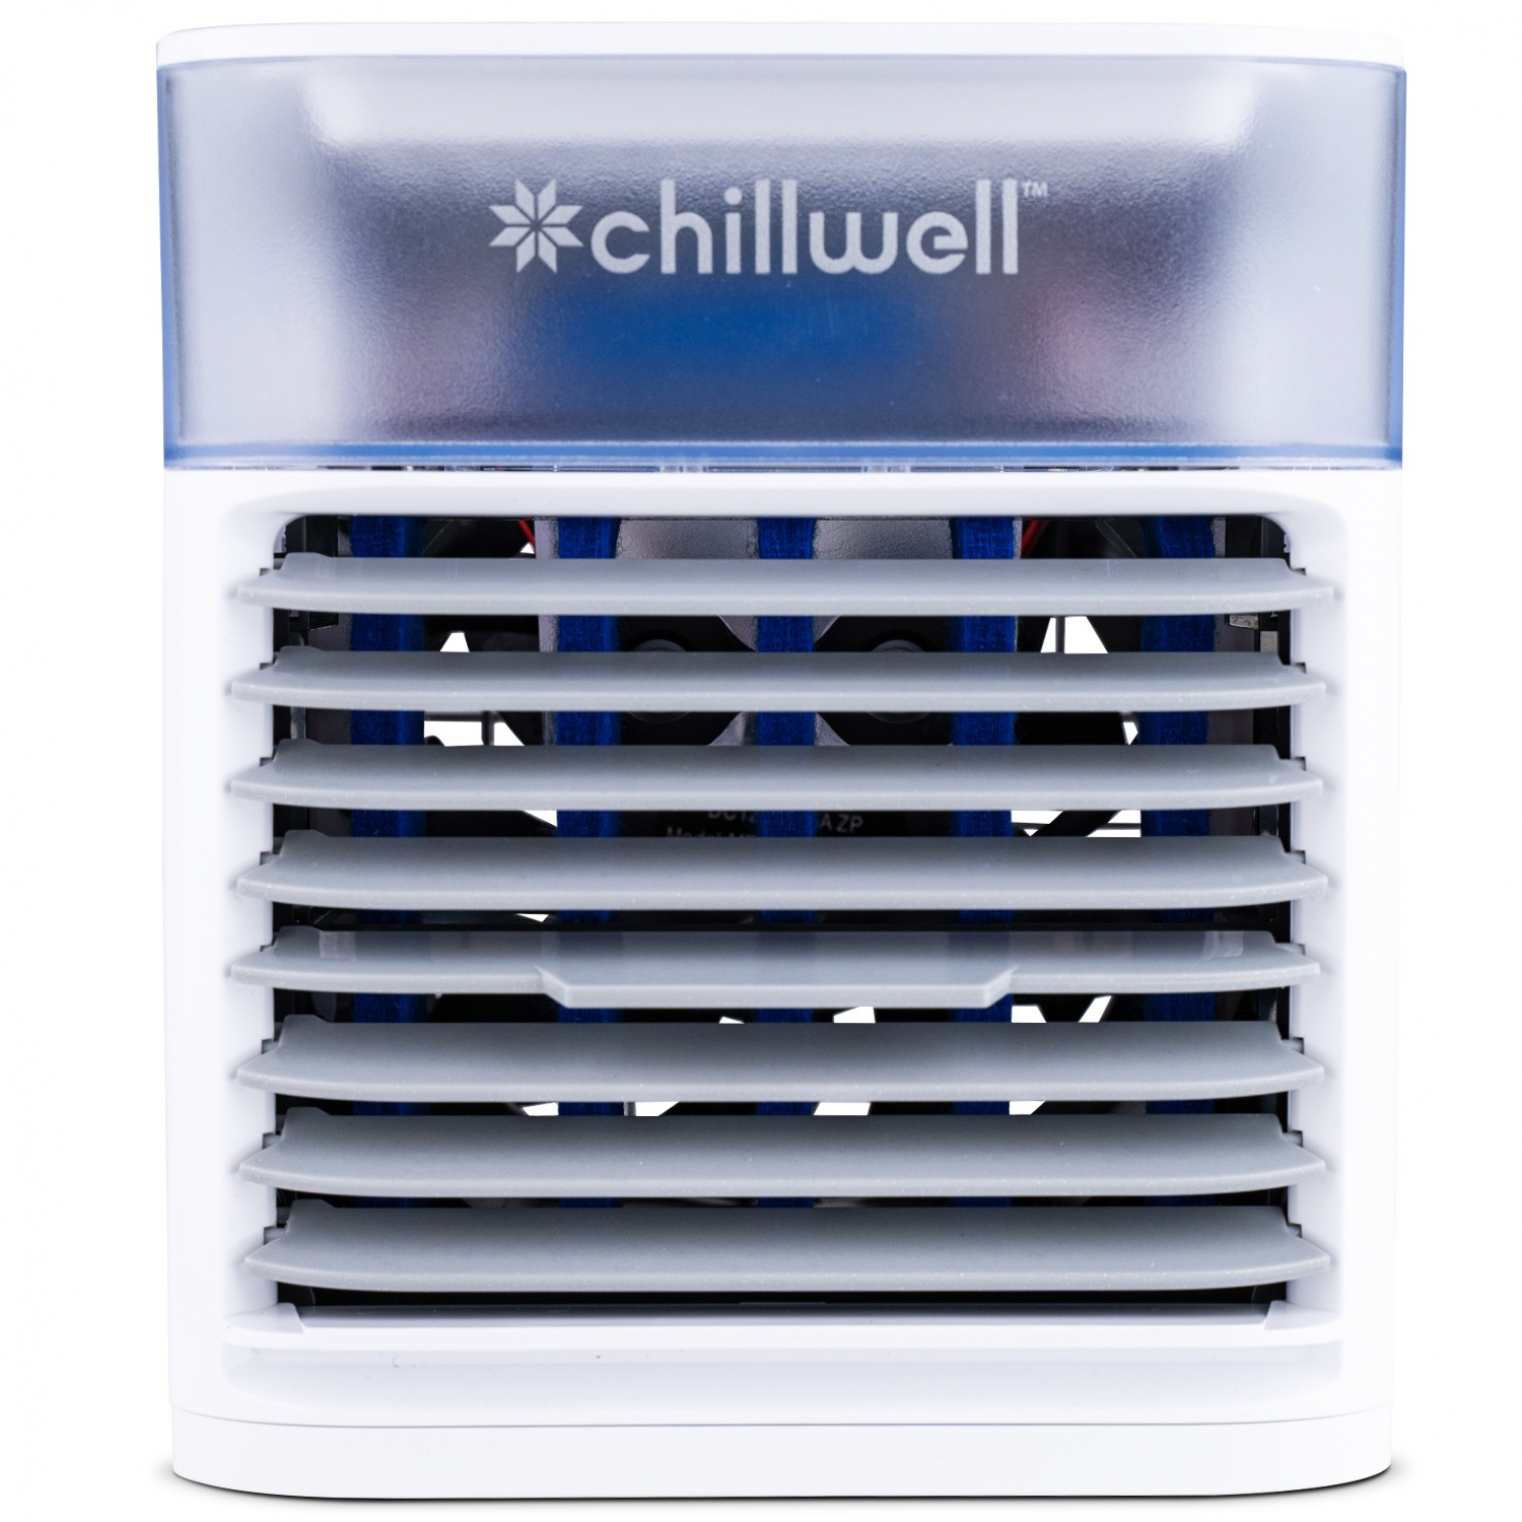 Chillwell AC Portable Ac Cooler